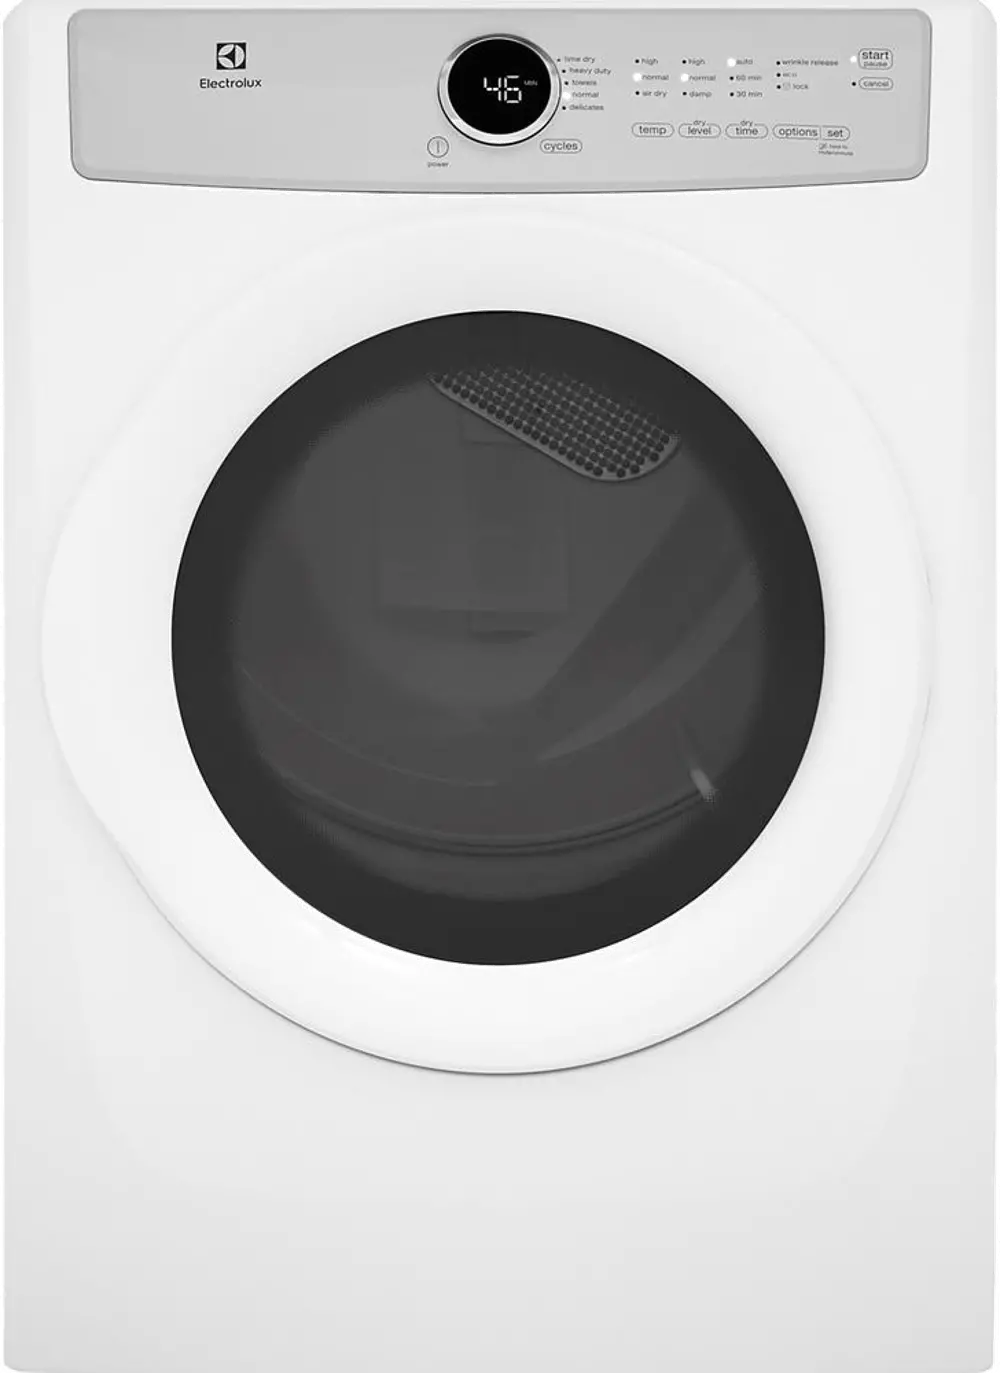 EFDE317TIW Electrolux Front Load Electric Dryer - White 8.0 cu. ft.-1